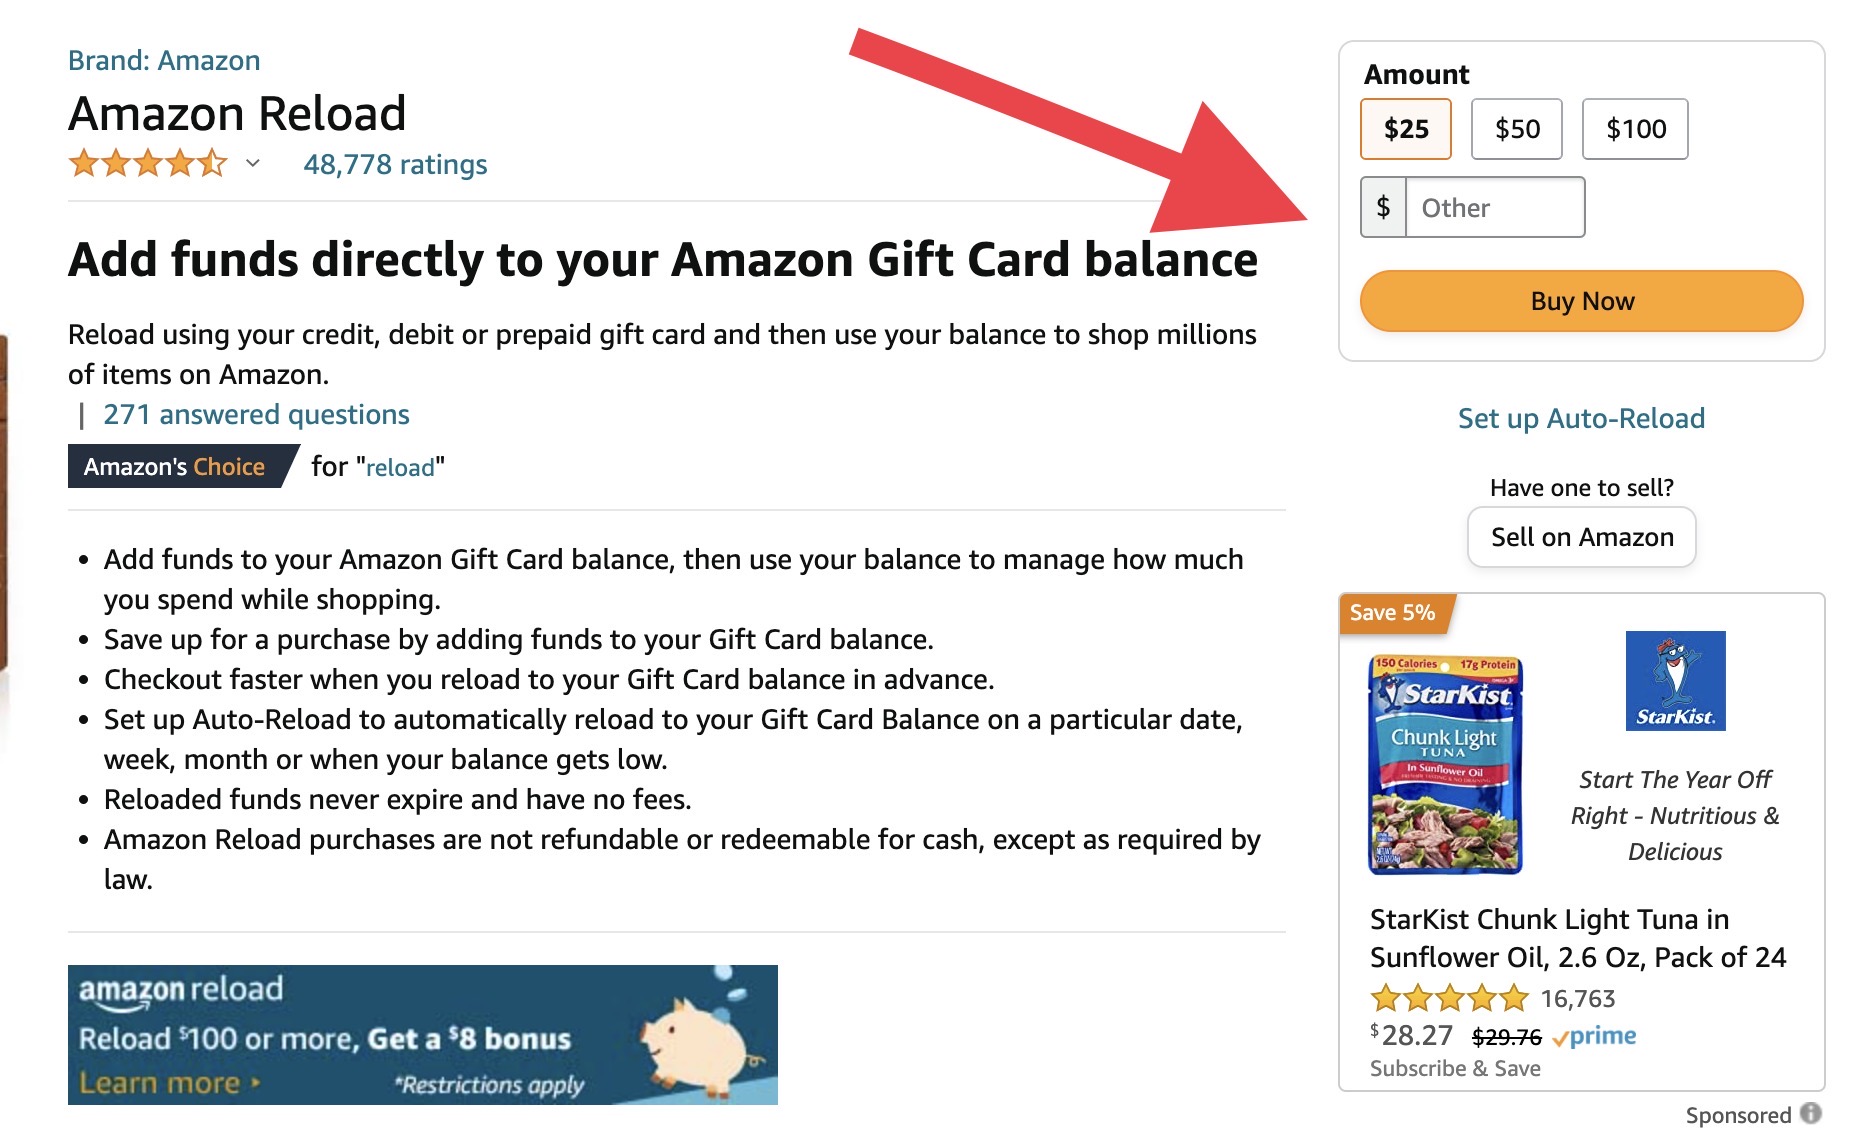 Can I Buy Visa Gift Card With Amazon Gift Card?